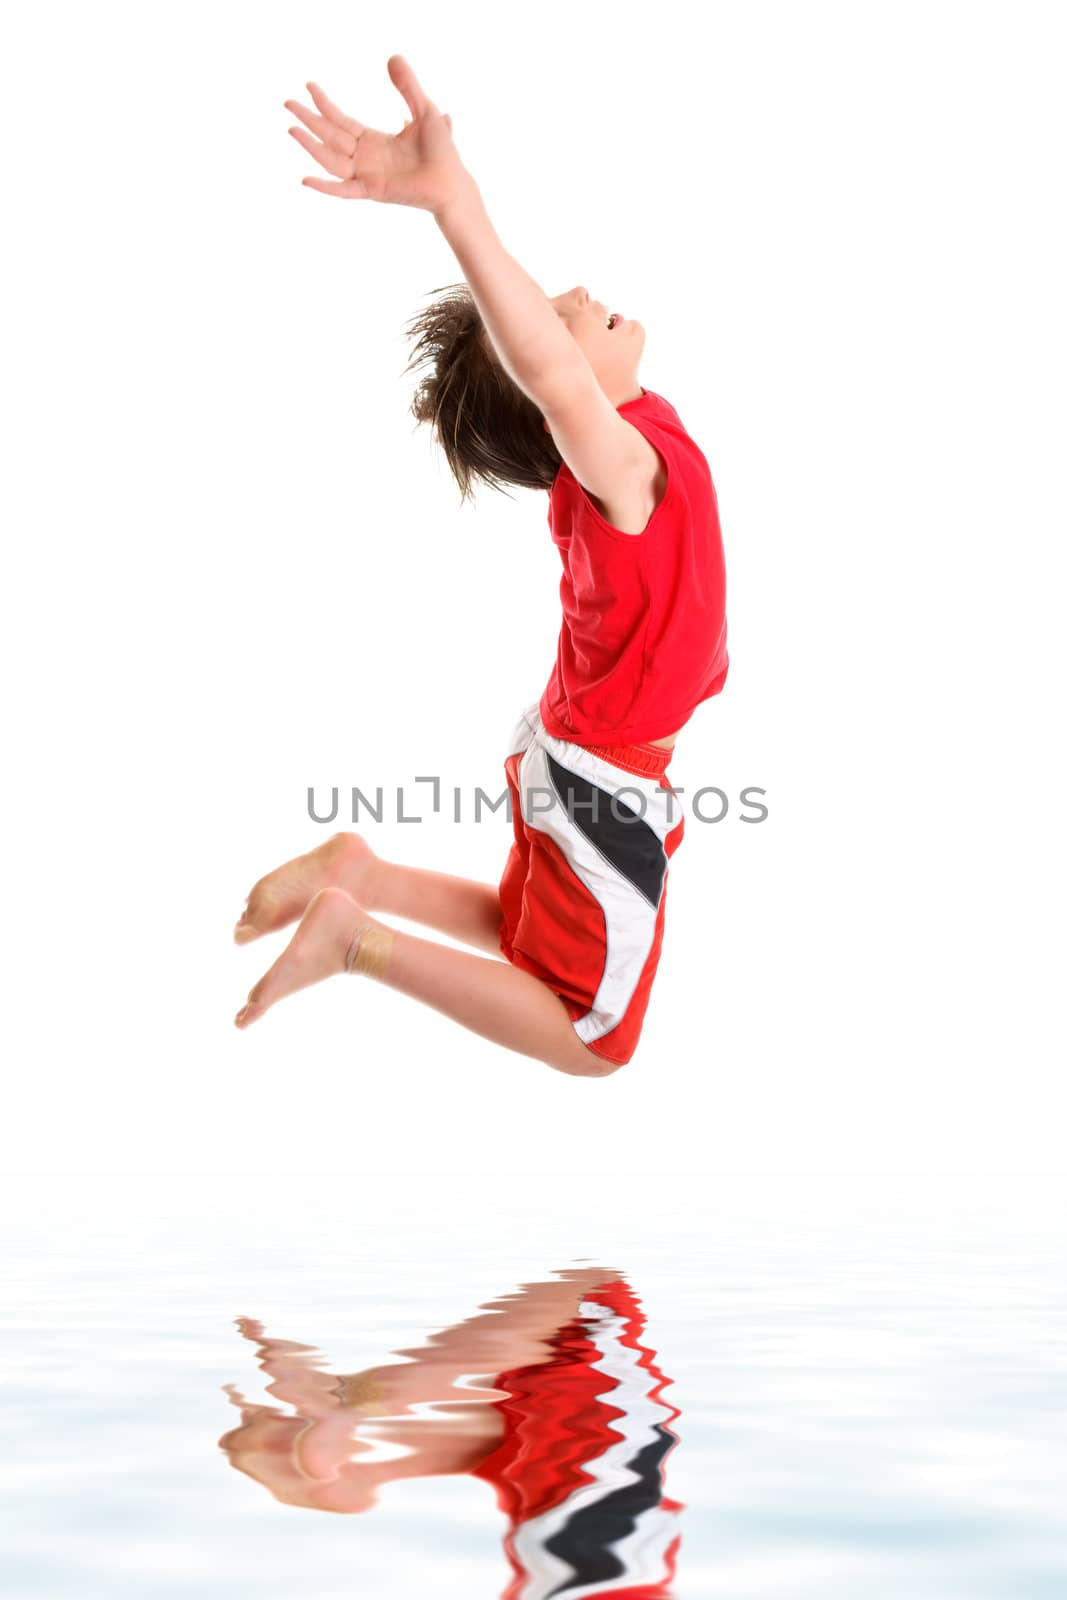 Leaping child hands stretched to sky by lovleah